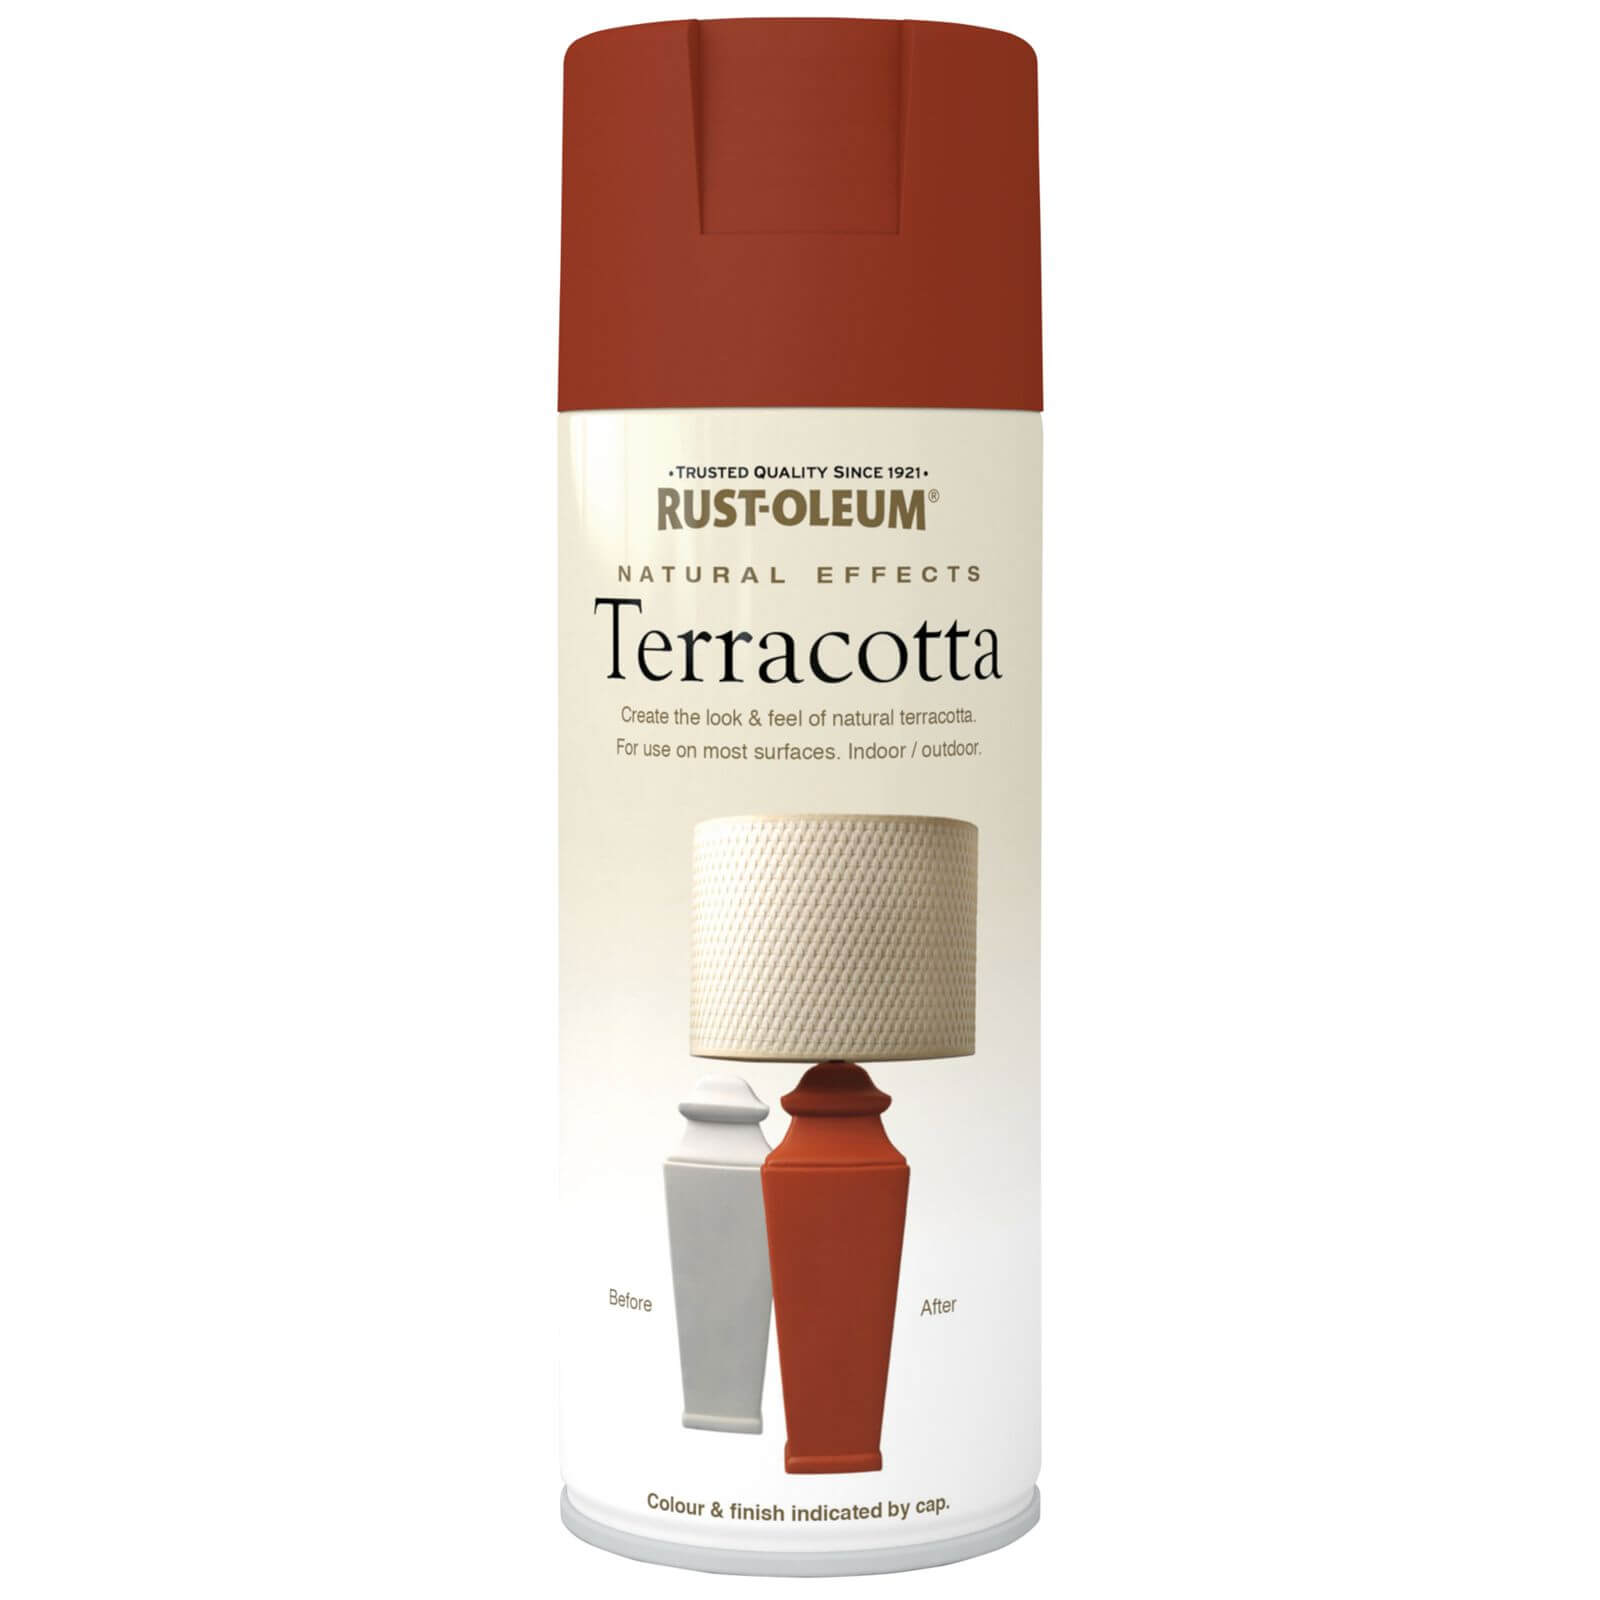 Photo of Rust-oleum Natural Effects Spray Paint - Terracotta - 400ml